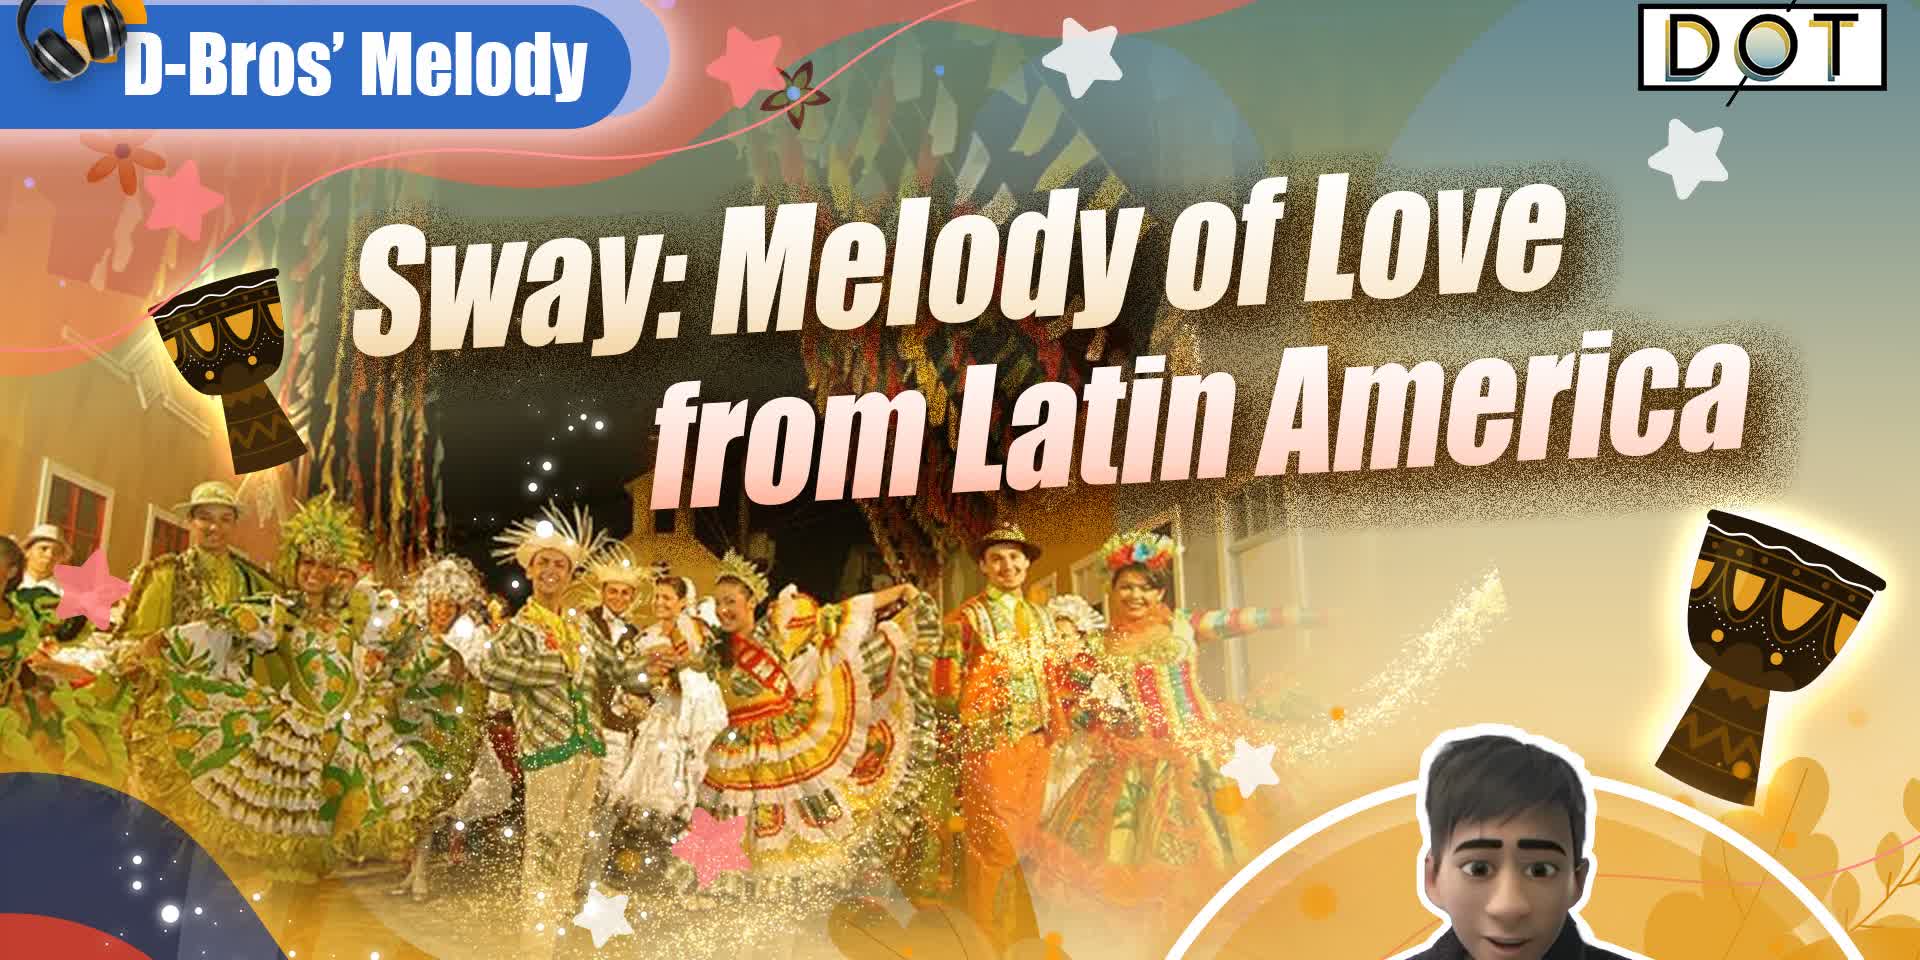 D-Bros' Melodies | Sway: Melody of Love from Latin America